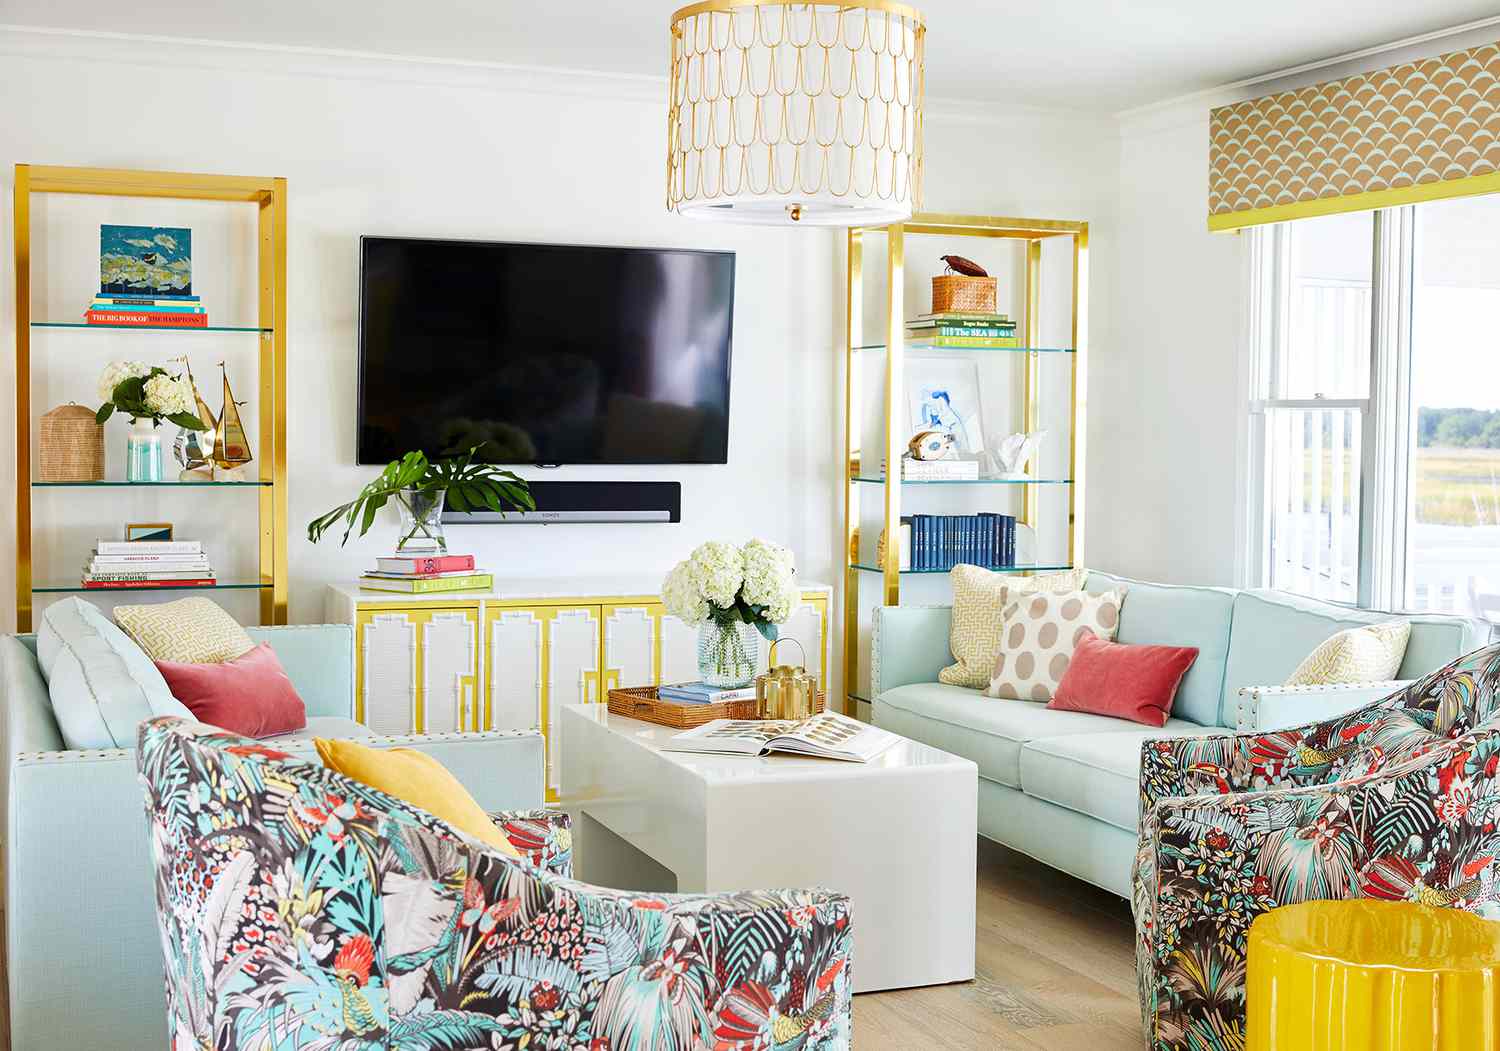 25 Stylish Ways to Decorate with a TV   Better Homes & Gardens